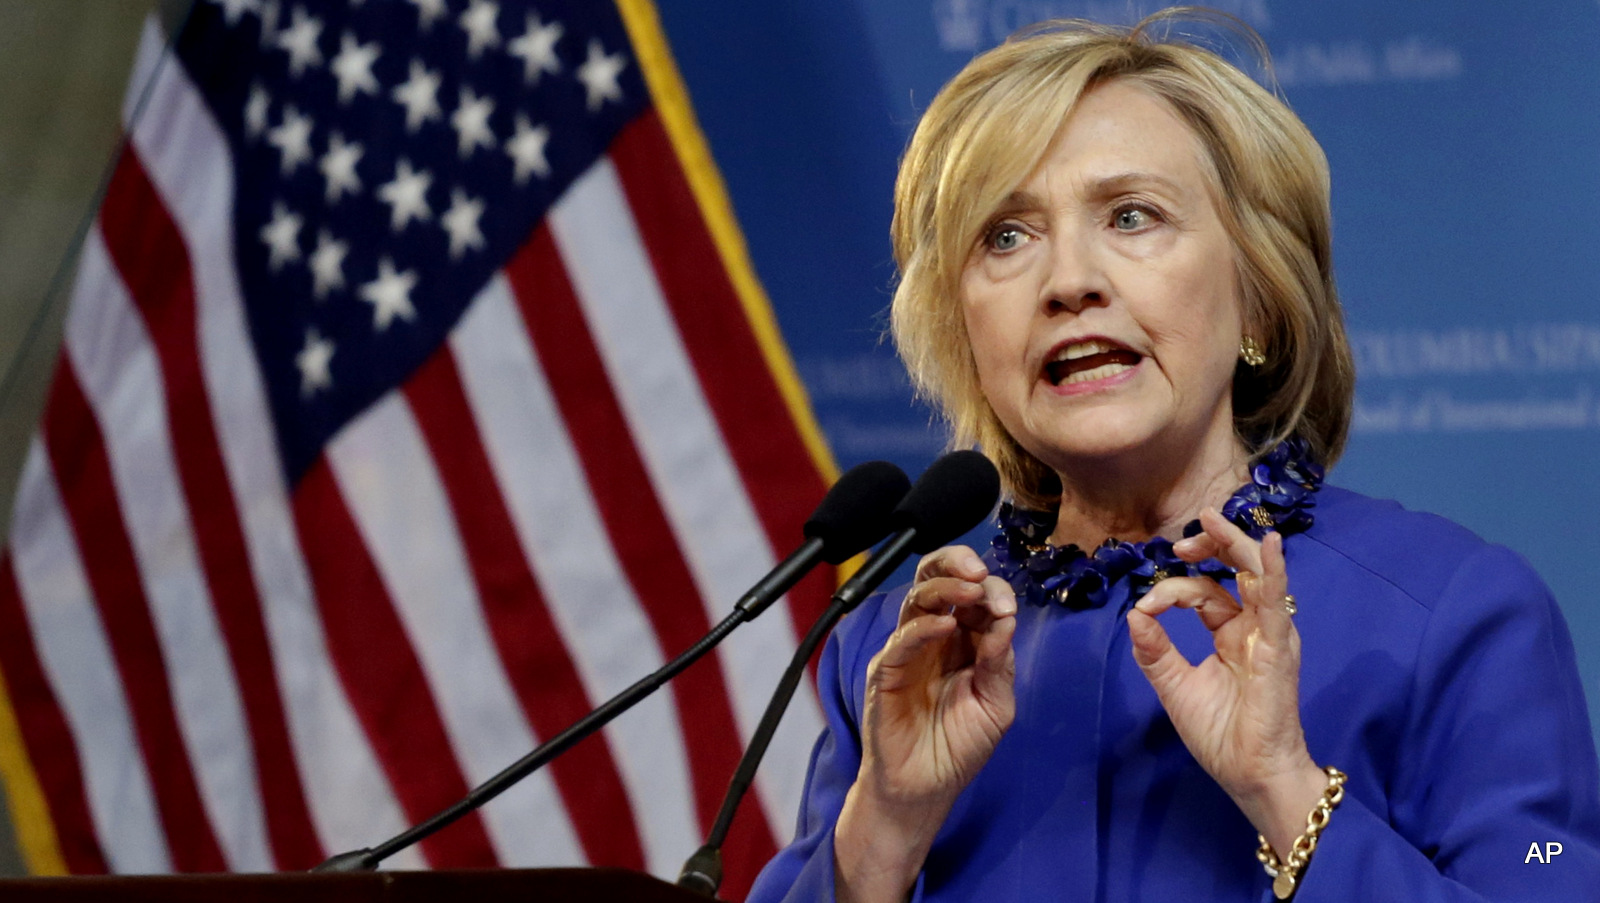 Hillary Rodham Clinton, a 2016 Democratic presidential contender, speaks at the David N. Dinkins Leadership and Public Policy Forum, Wednesday, April 29, 2015 in New York. 